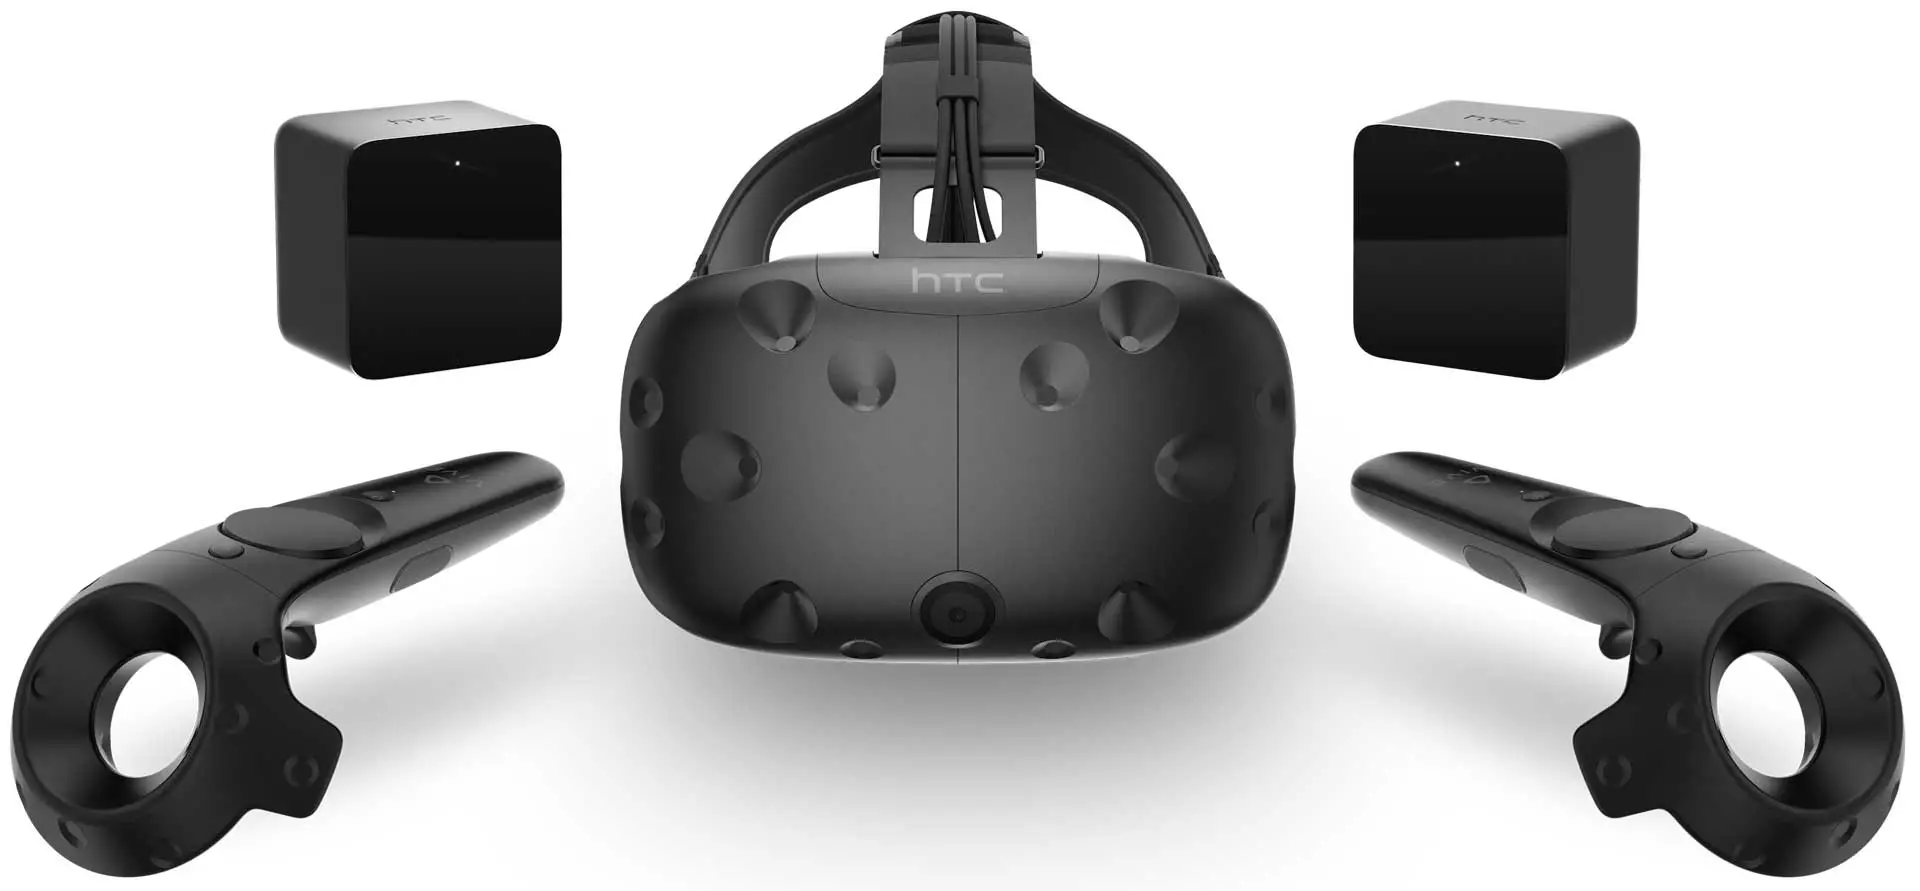 htc_vive_price_release_date_steamvr